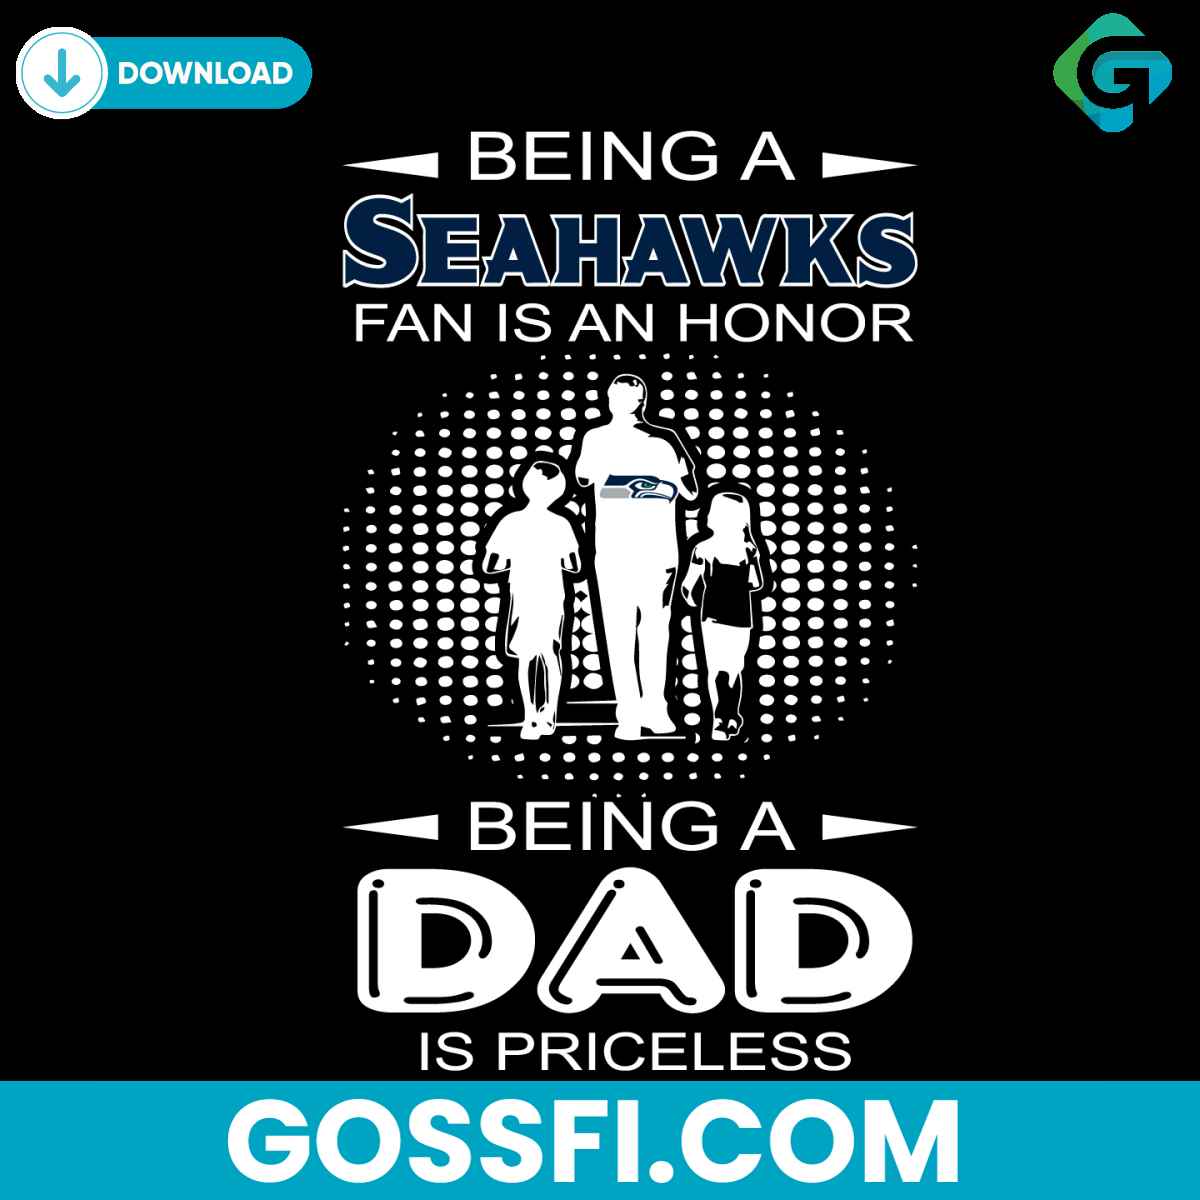 being-a-seahawks-fan-is-an-honor-being-a-dad-is-priceless-svg